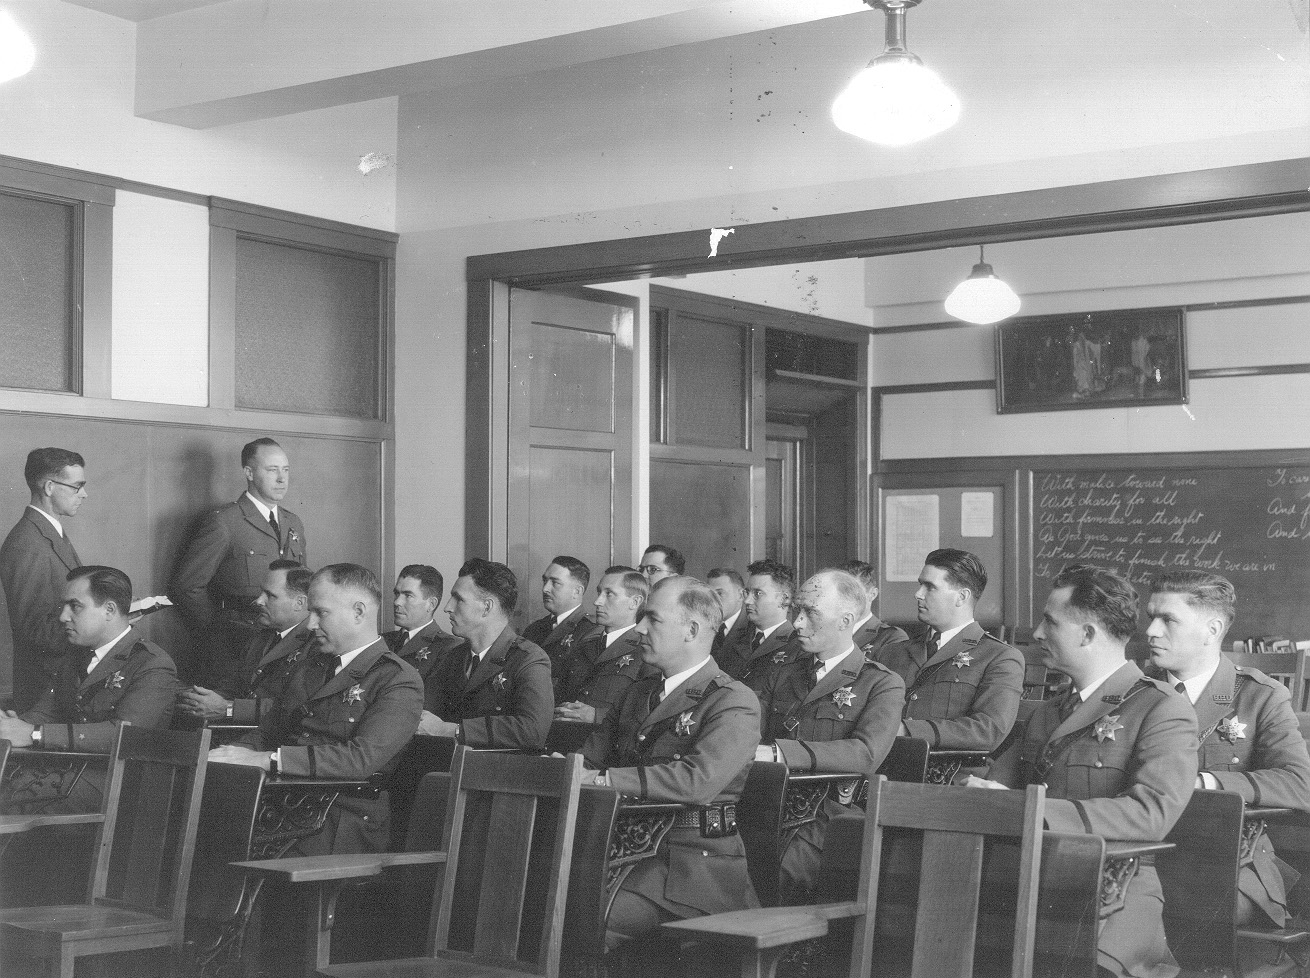 August Vollmer pioneered regular training for his officers. Here police officers listen to a lecture held at Berkeley City Hall in 1935.